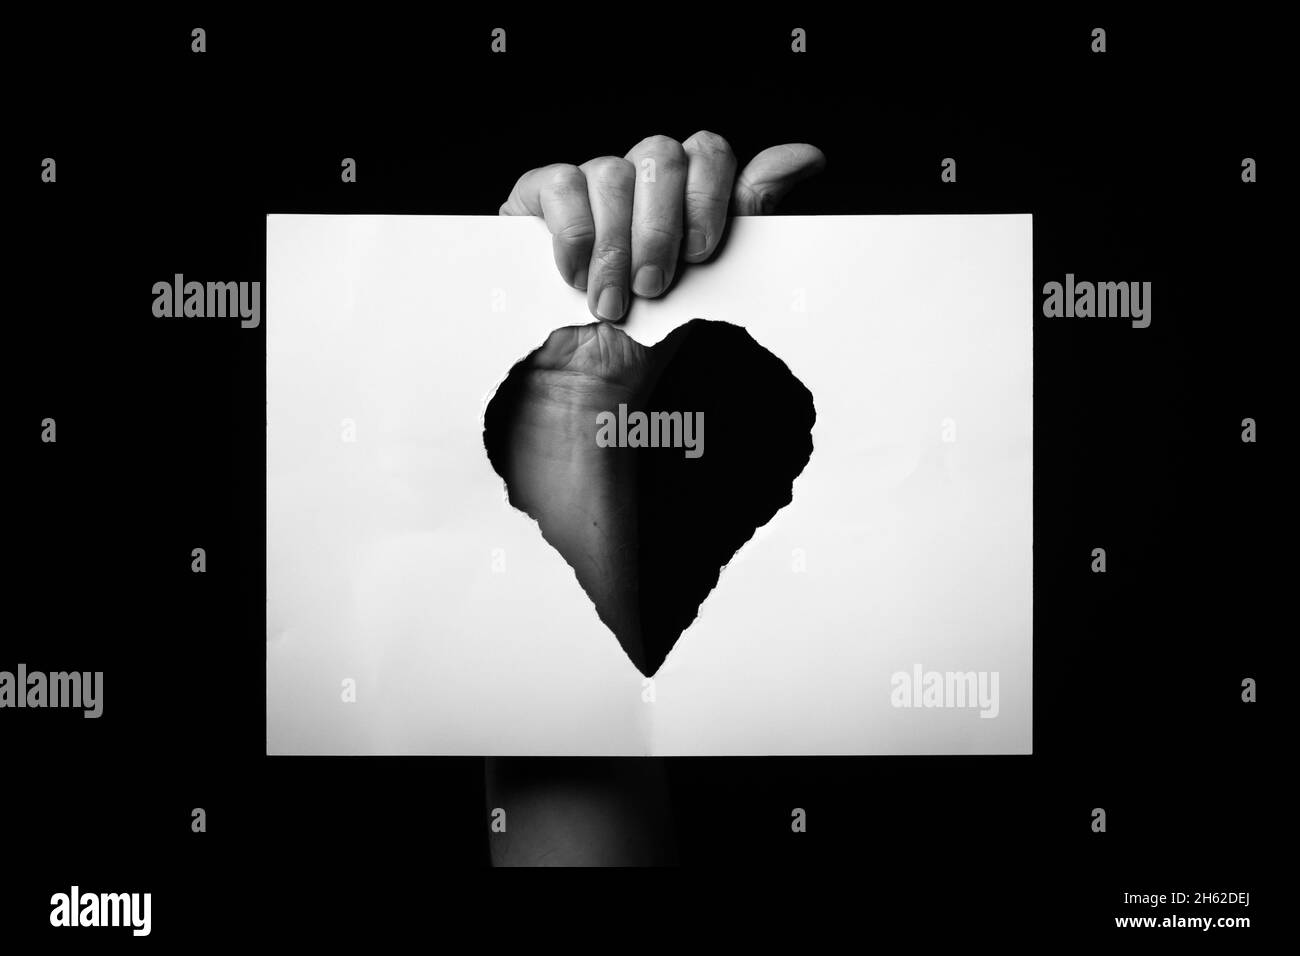 B+W image of male hand holding sheet of paper with torn heart shaped hole against black background. Stock Photo